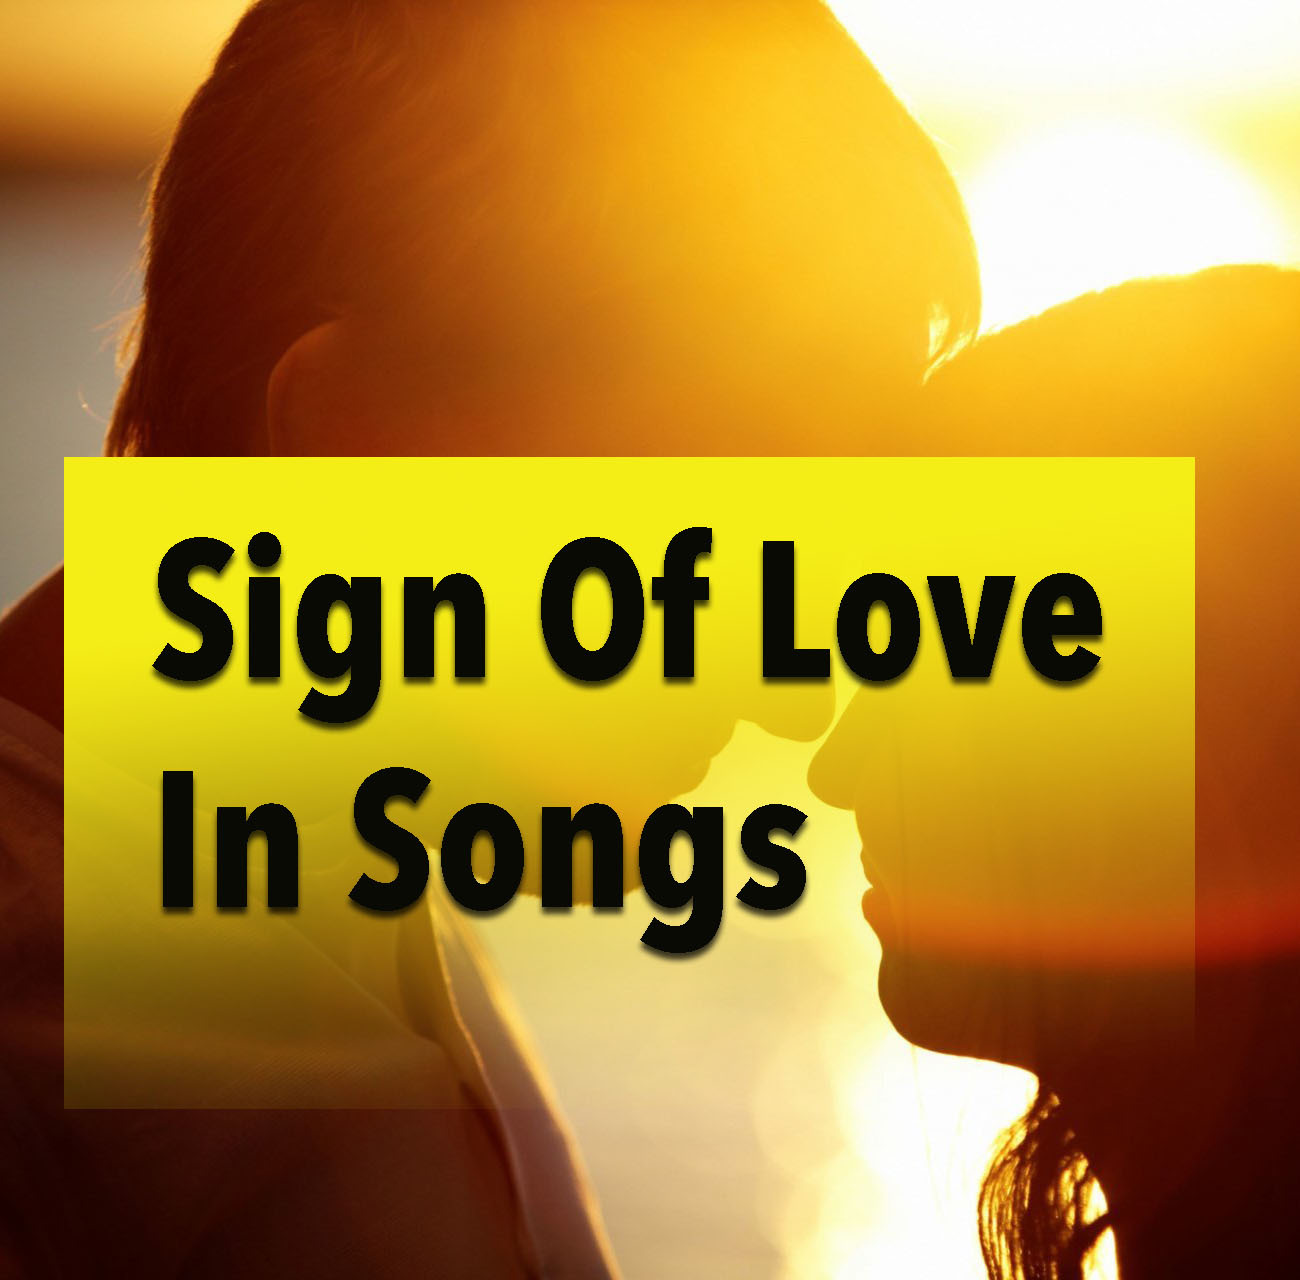 Sign Of Love In Songs